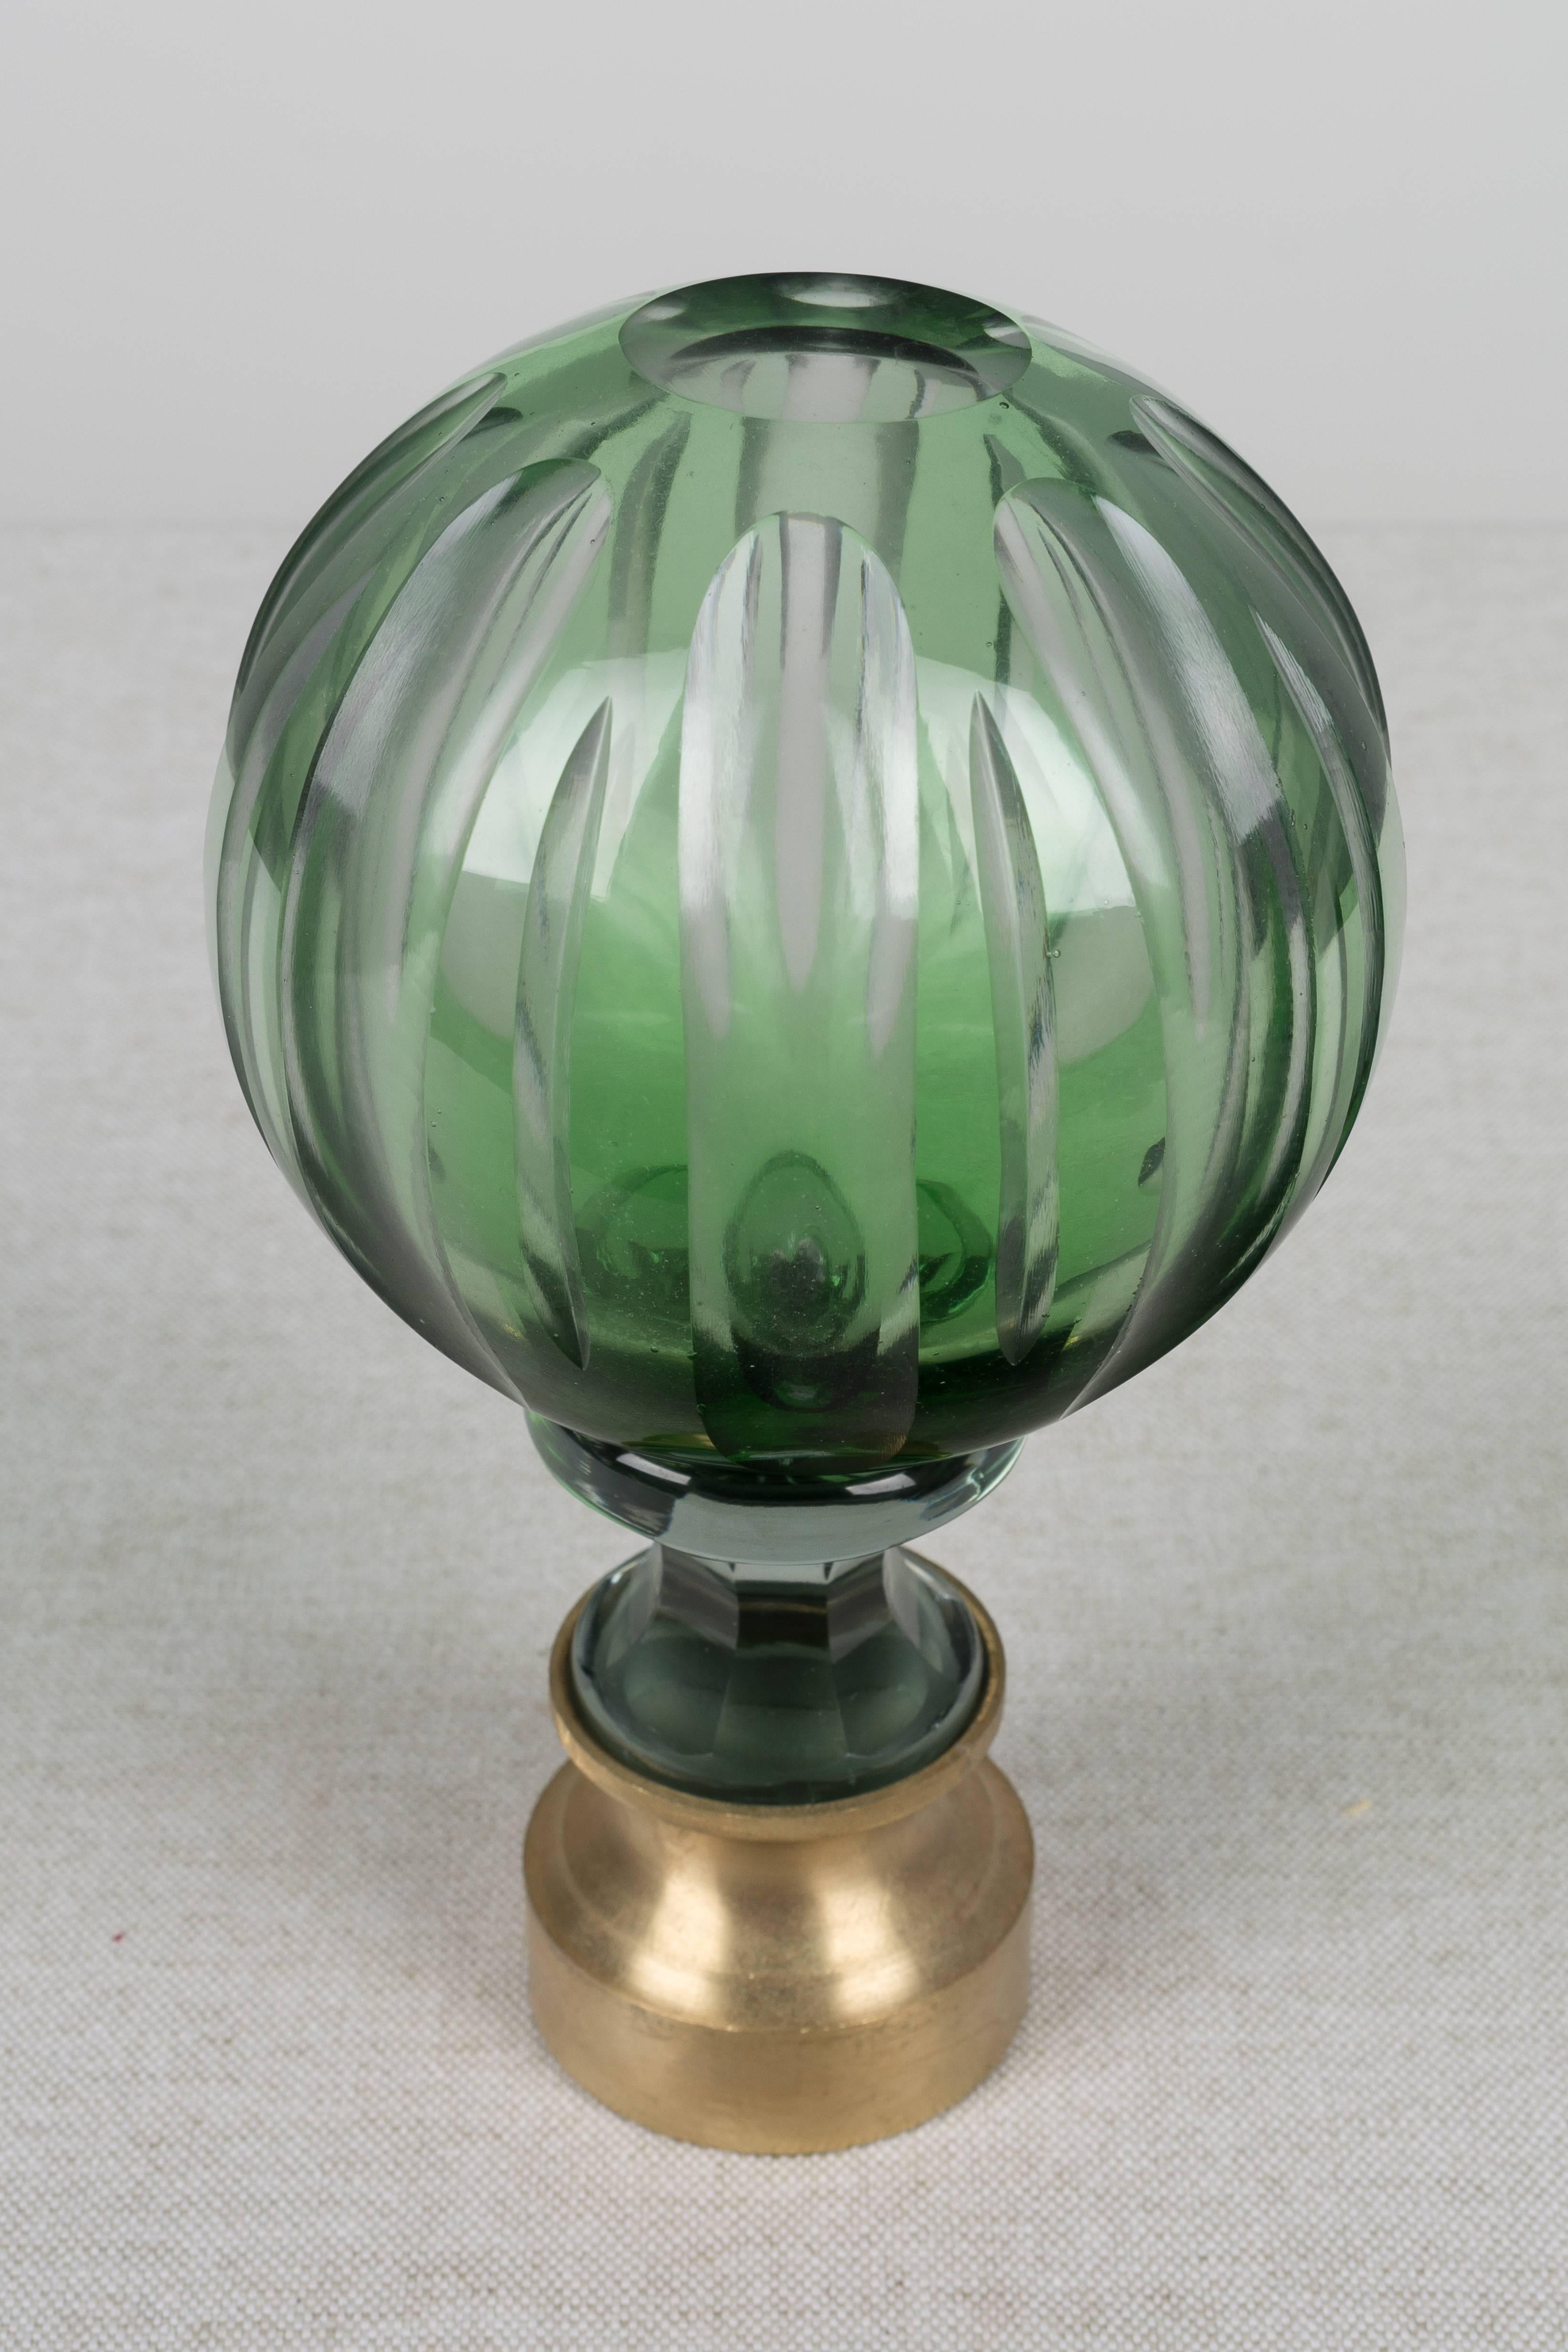 Brass 19th Century French Glass Boule D'escalier or Newel Post Finial